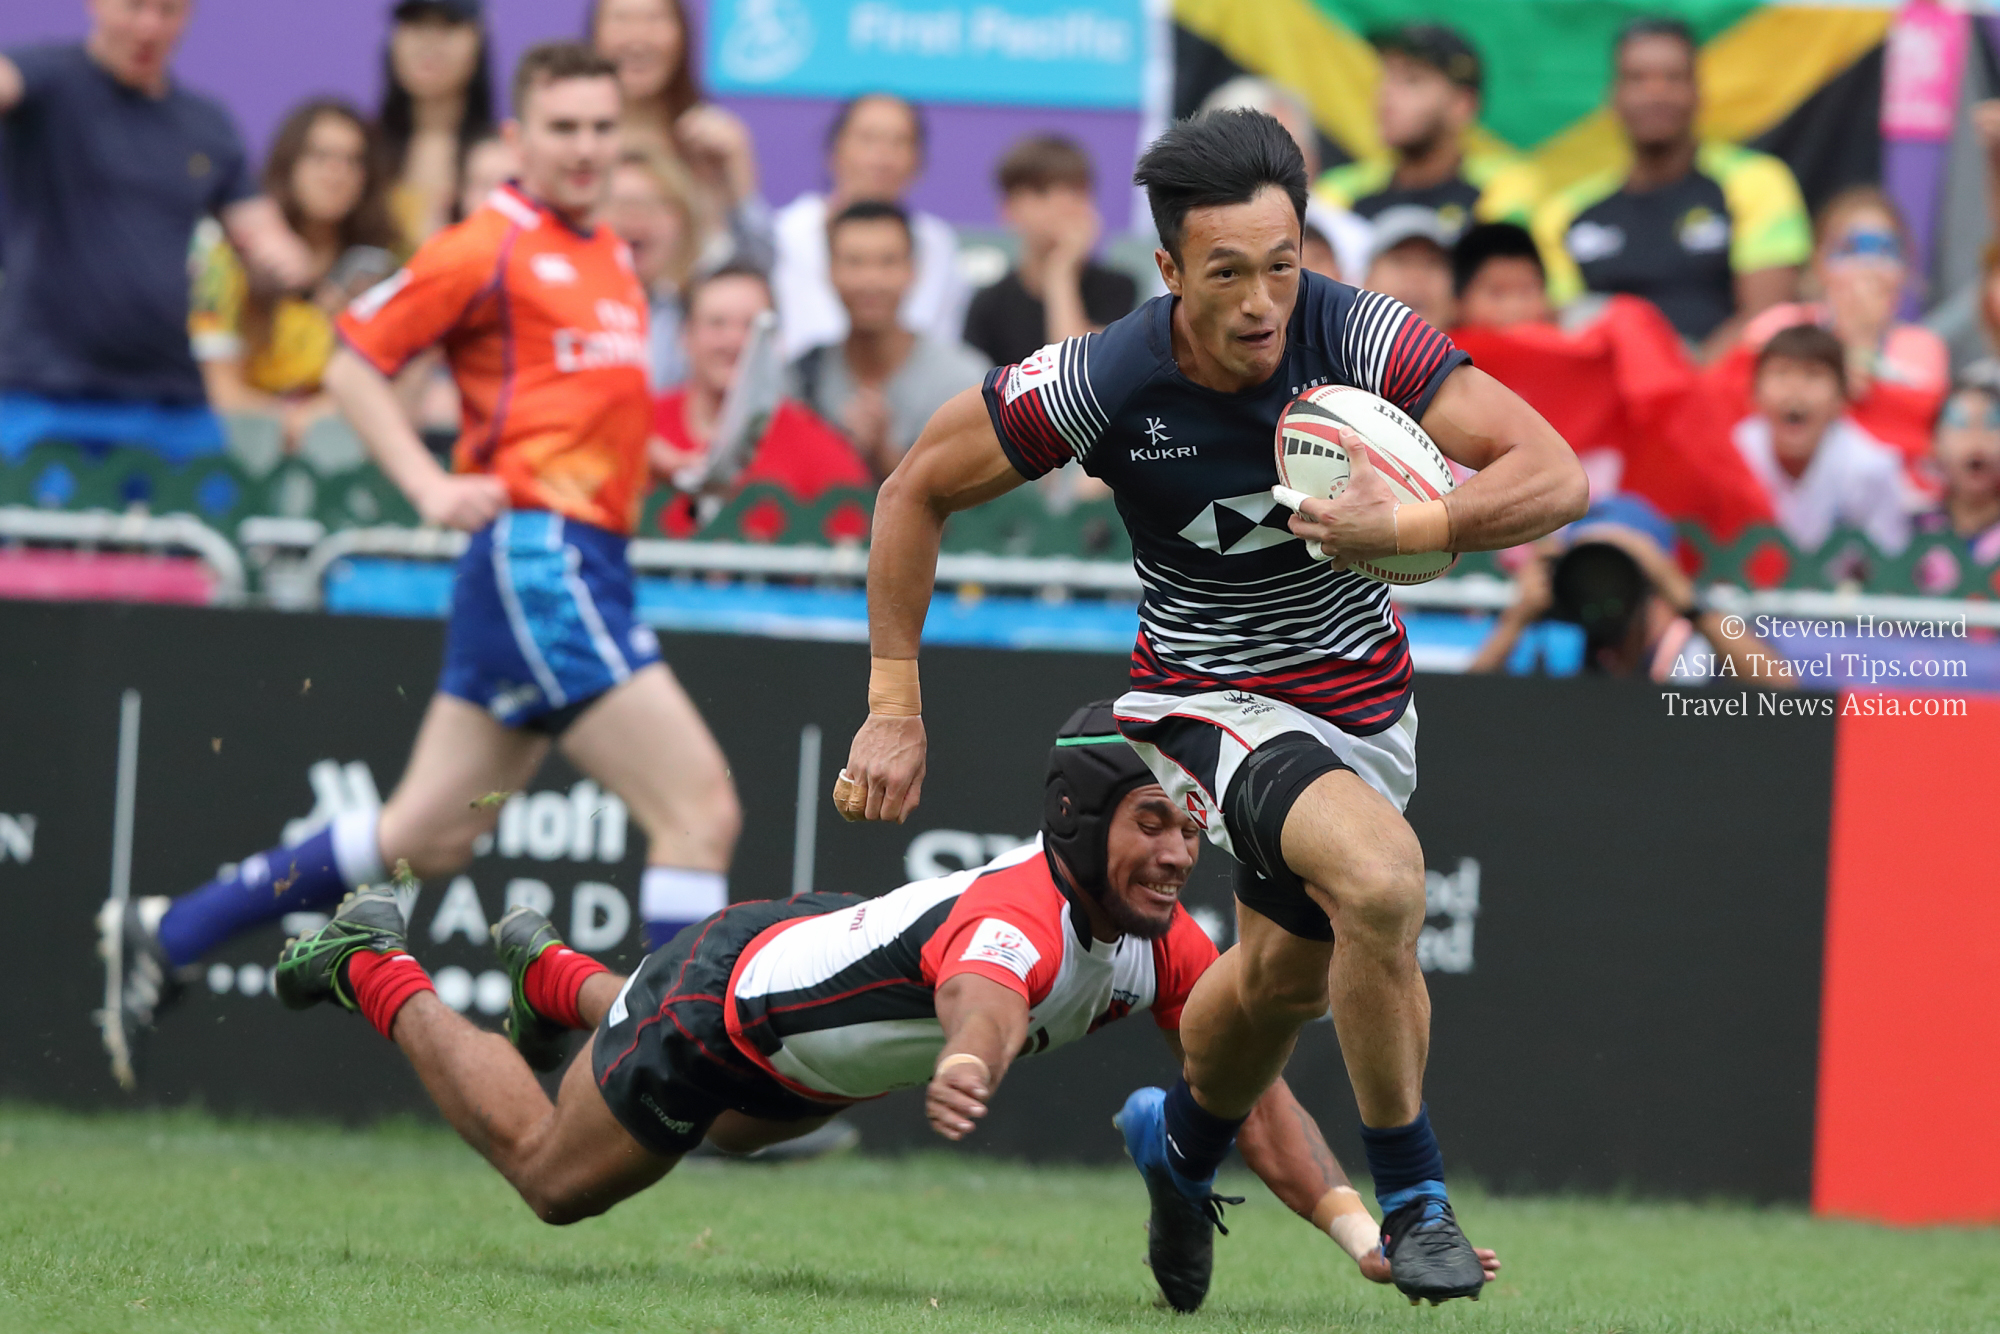 Hong Kong in action during the 2018 Cathay Pacific / HSBC Hong Kong Sevens tournament. Picture by Steven Howard of TravelNewsAsia.com. Click to enlarge.